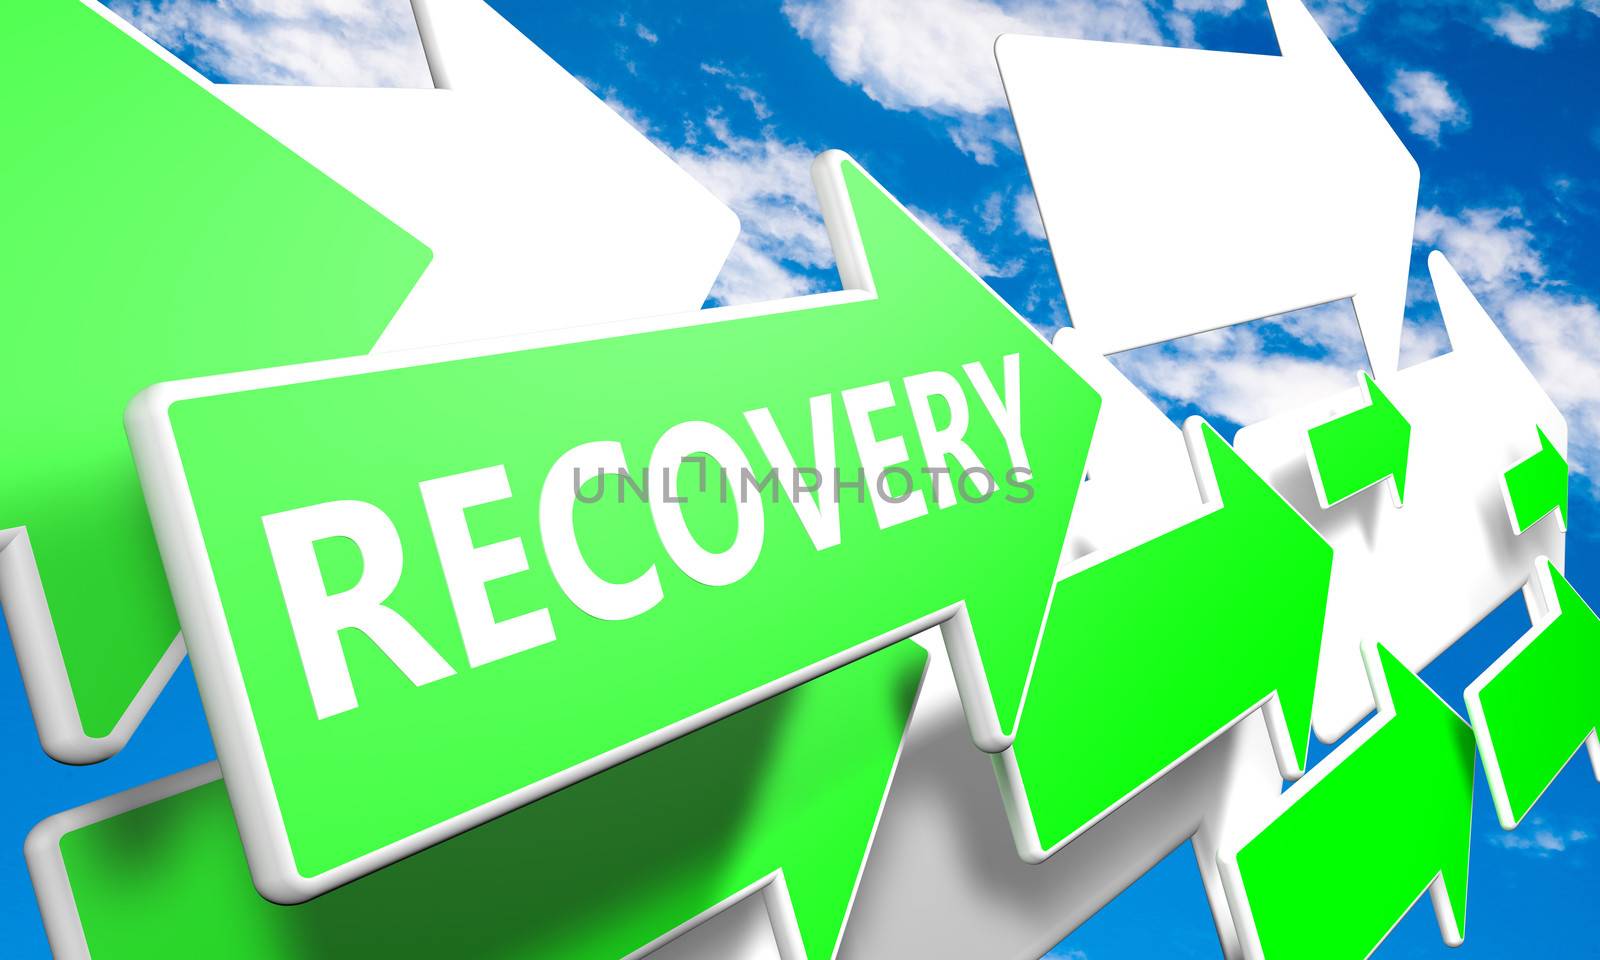 Recovery 3d render concept with green and white arrows flying upwards in a blue sky with clouds